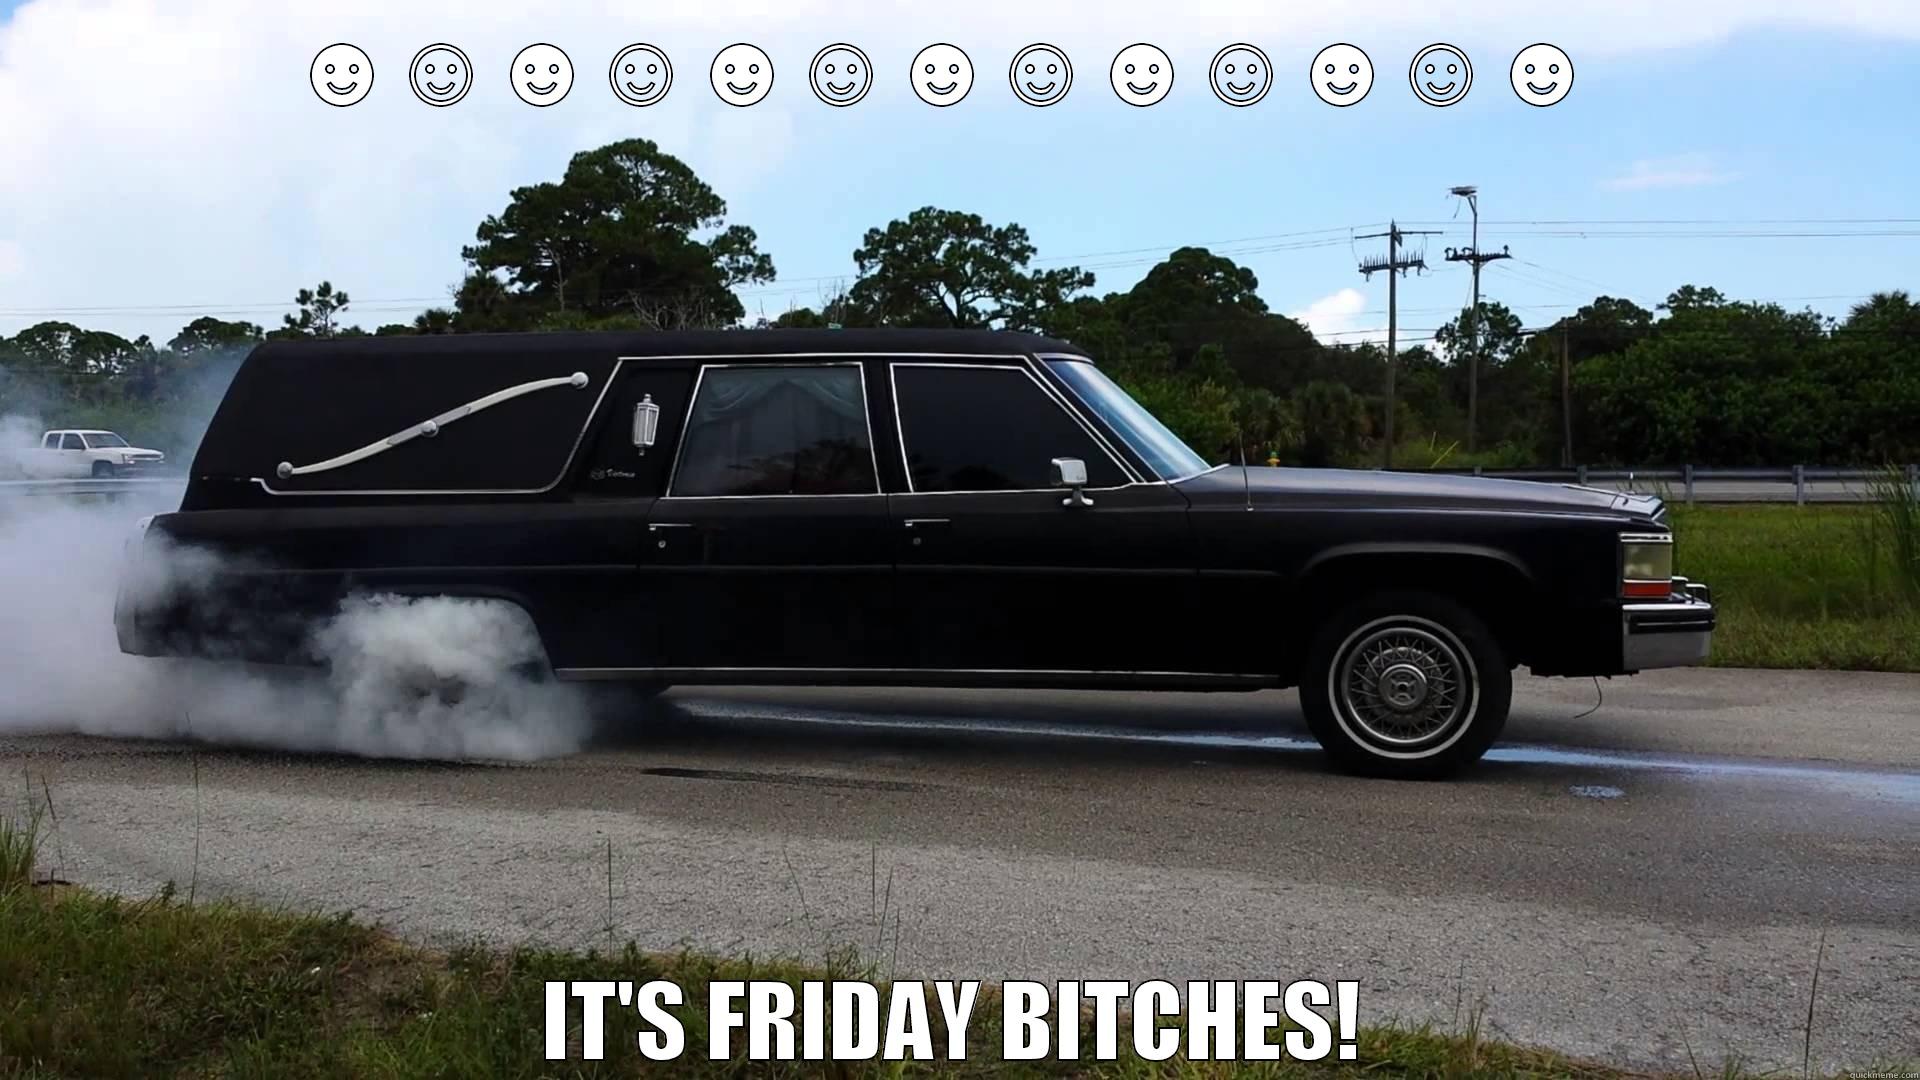 funny friday hearse - ☻☺☻☺☻☺☻☺☻☺☻☺☻  IT'S FRIDAY BITCHES! Misc